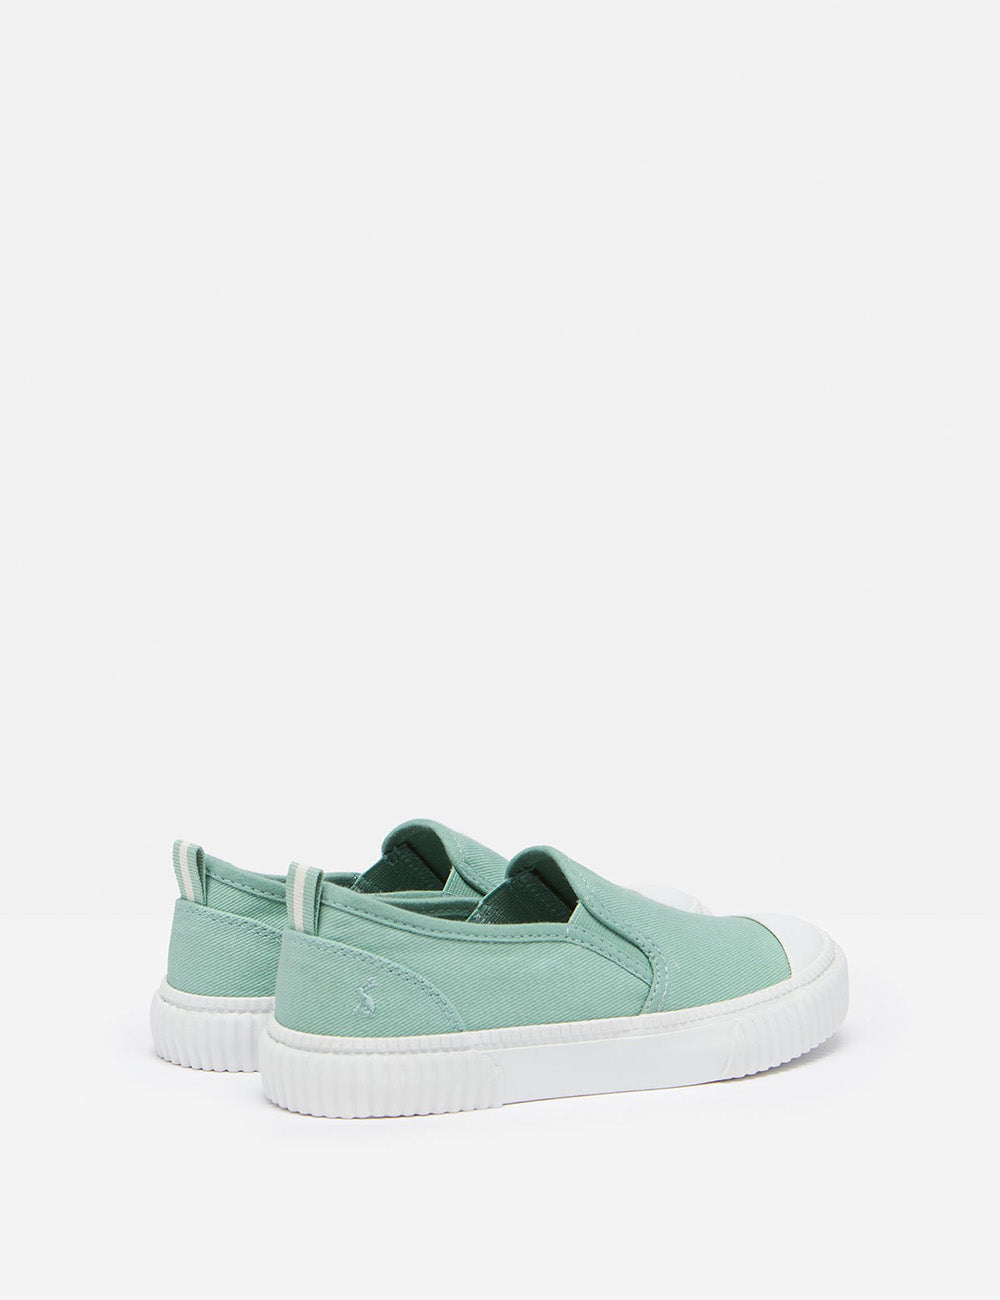 Joules Peasy Canvas Trainer - Soft Green